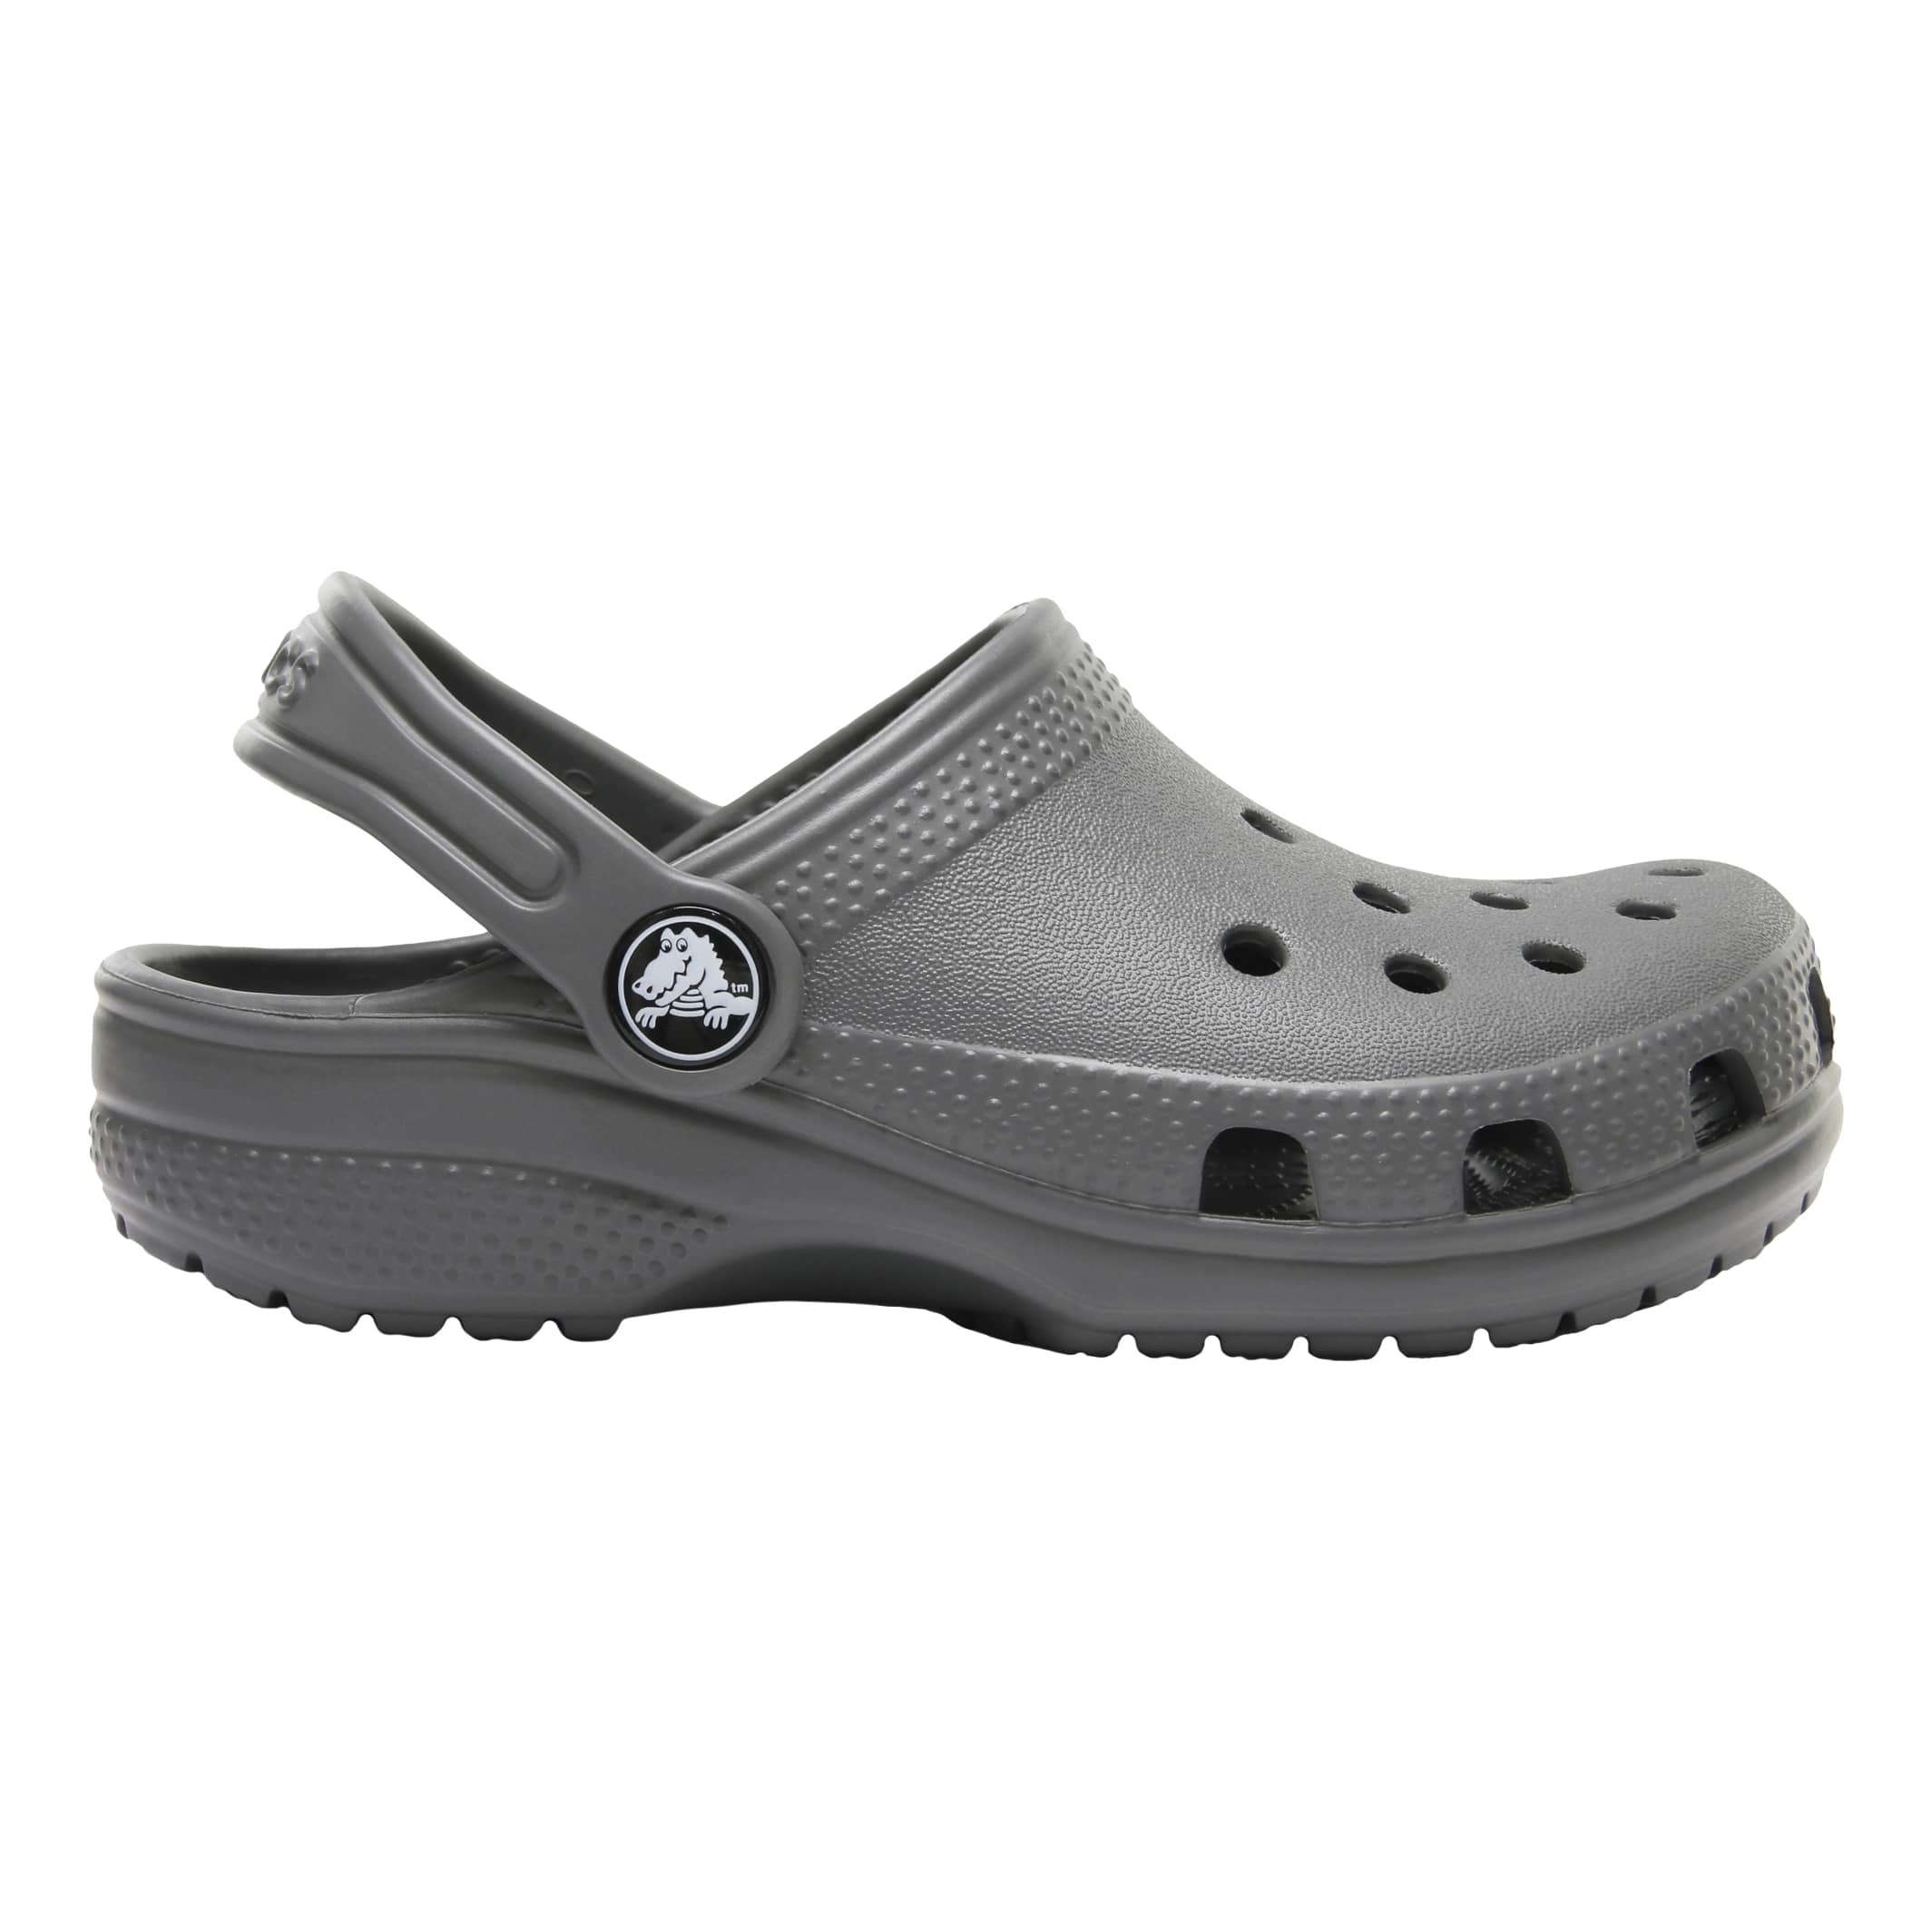 The Crocs™ Youth Classic Clog - side